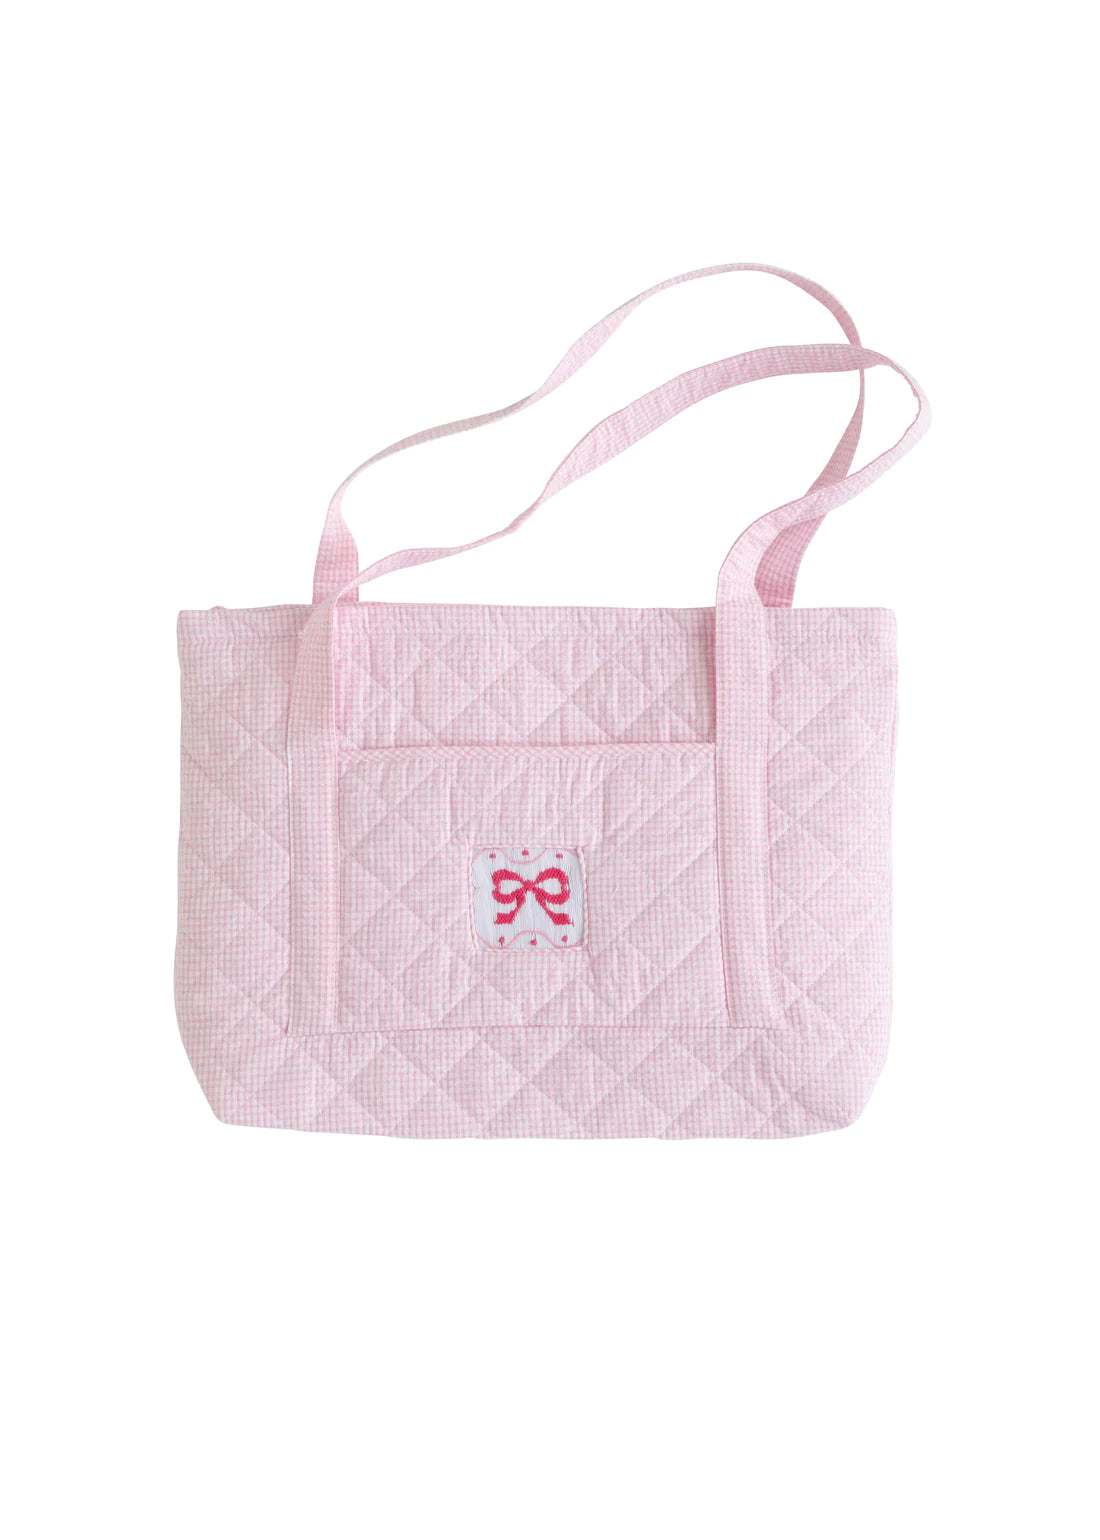 Quilted Luggage - Bow - Breckenridge Baby